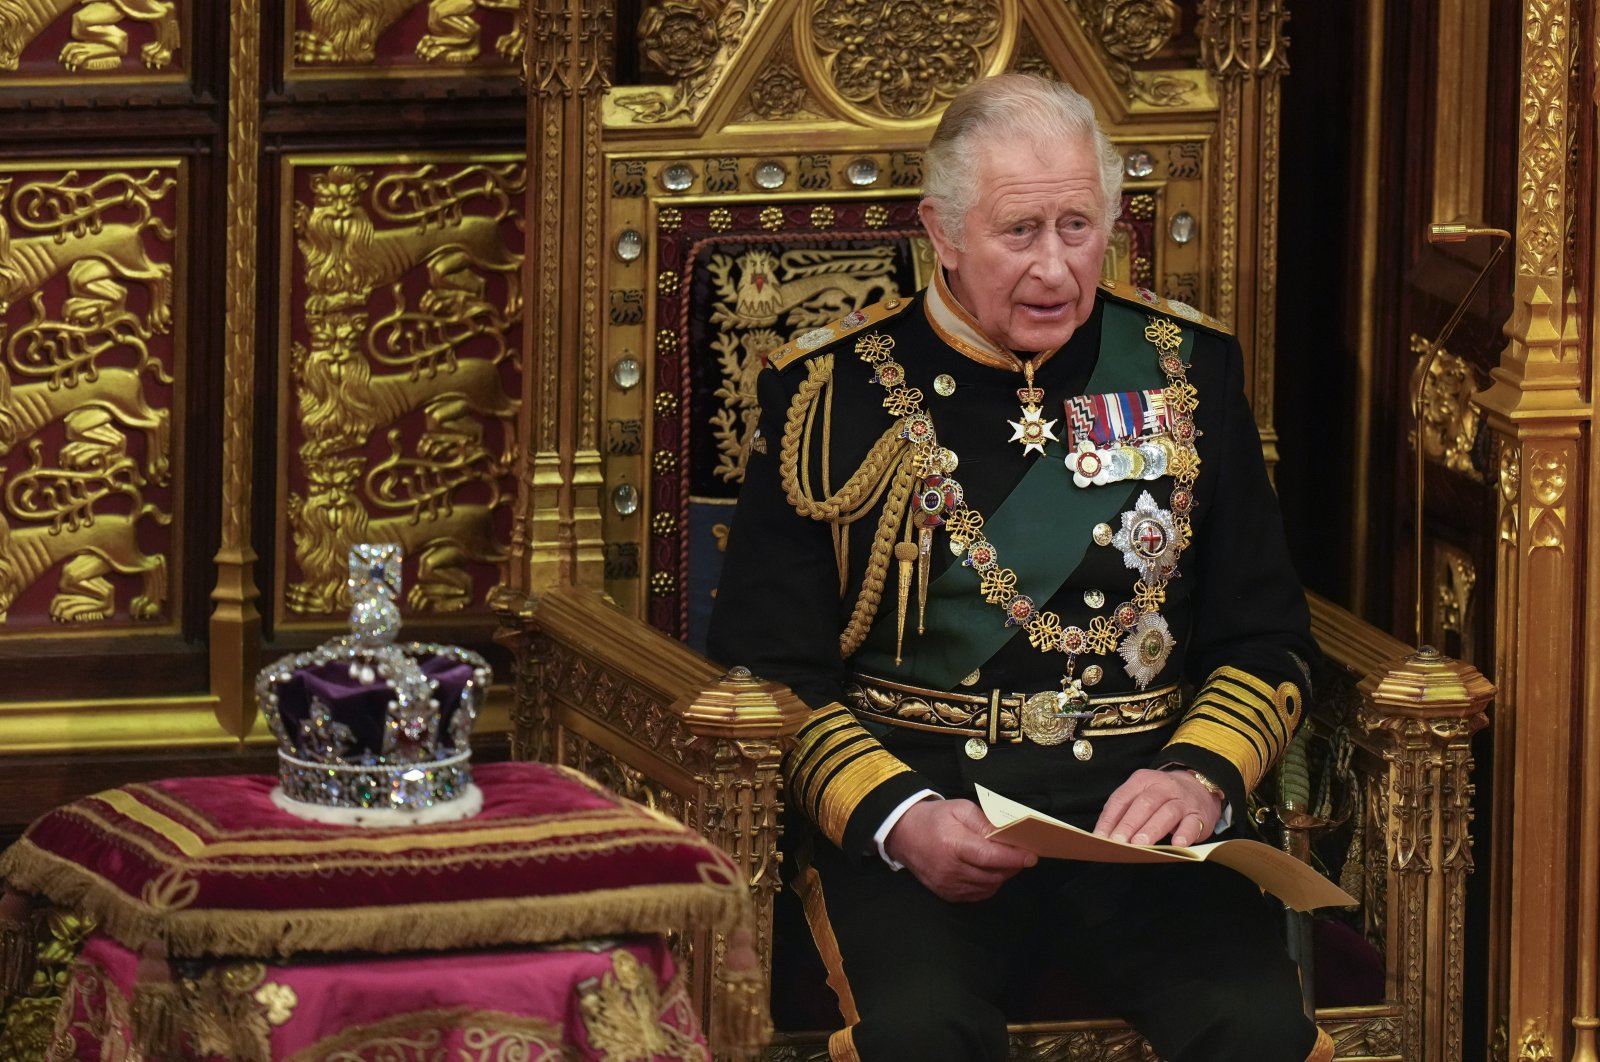 Prince Charles reads the queen&#039;s speech seated next to her crown during the State Opening of Parliament, at the Palace of Westminster in London, Britain, May 10, 2022. (AP Photo)